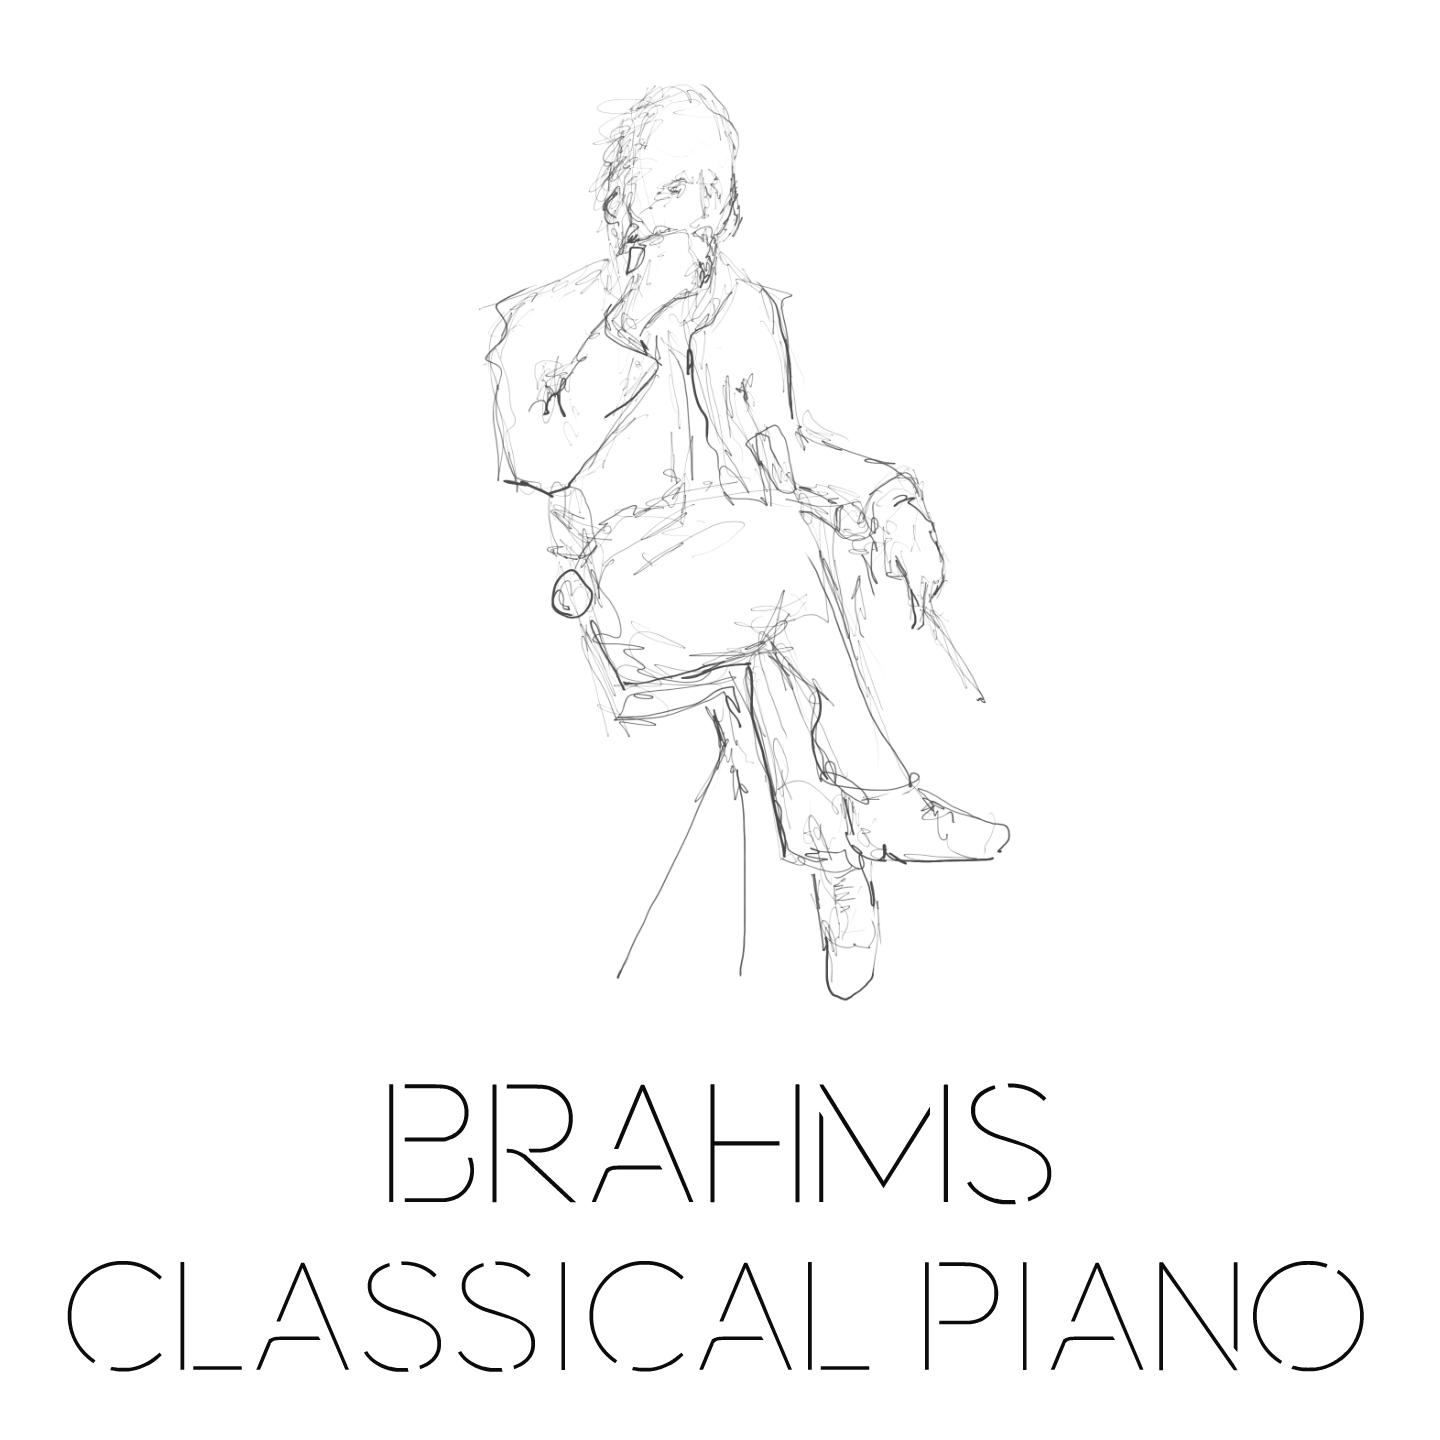 Brahms Classical Piano